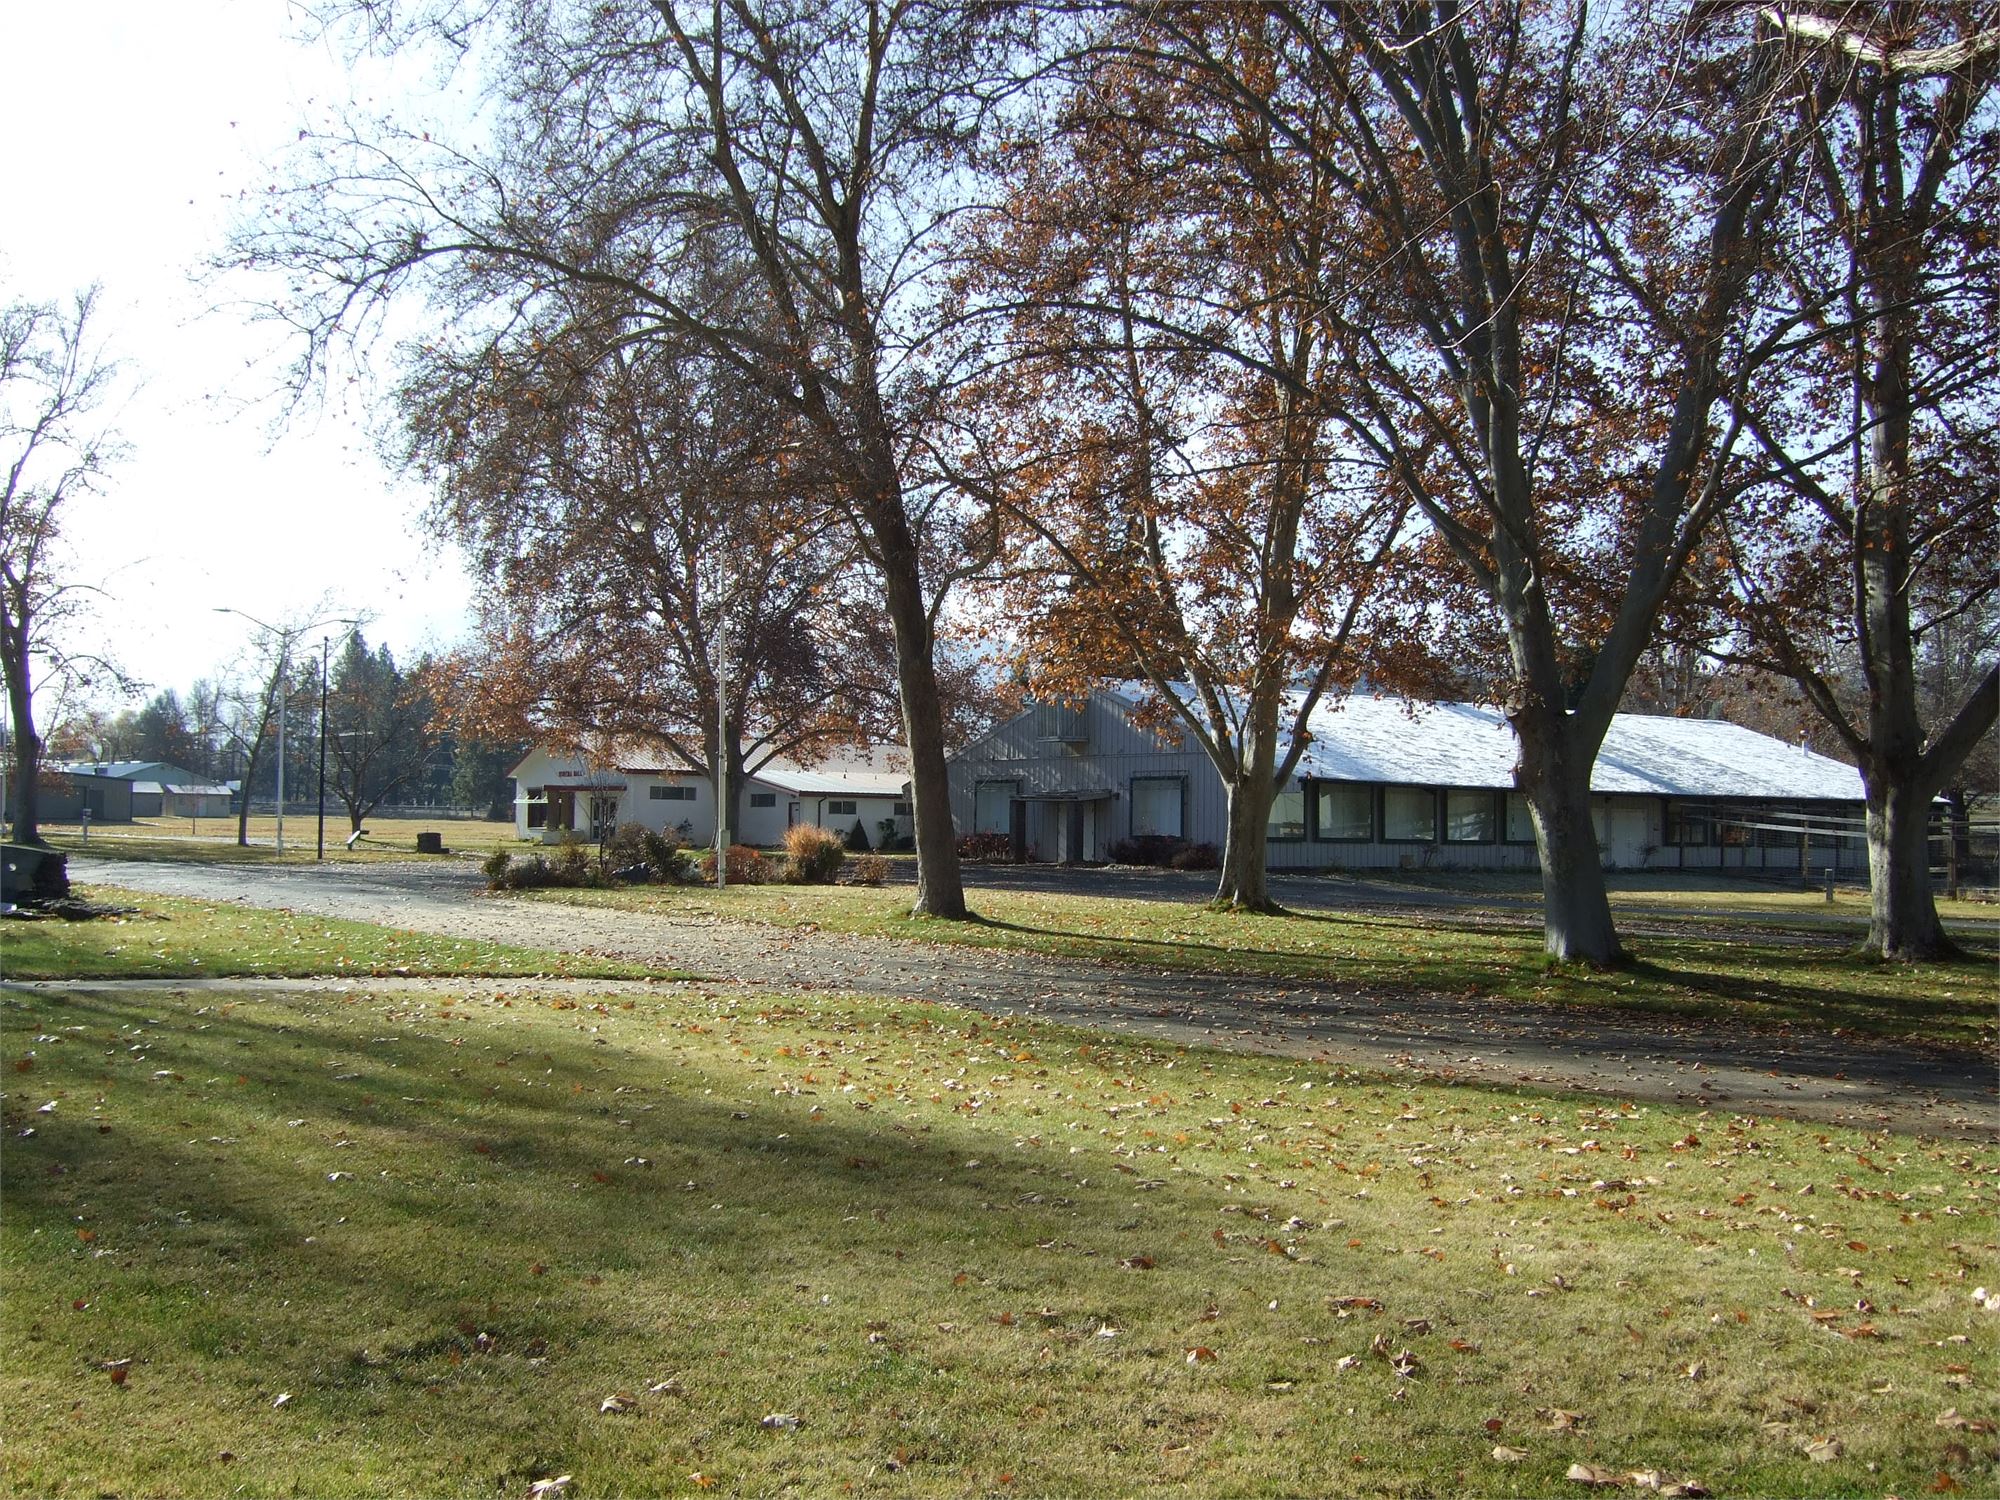 North Grounds